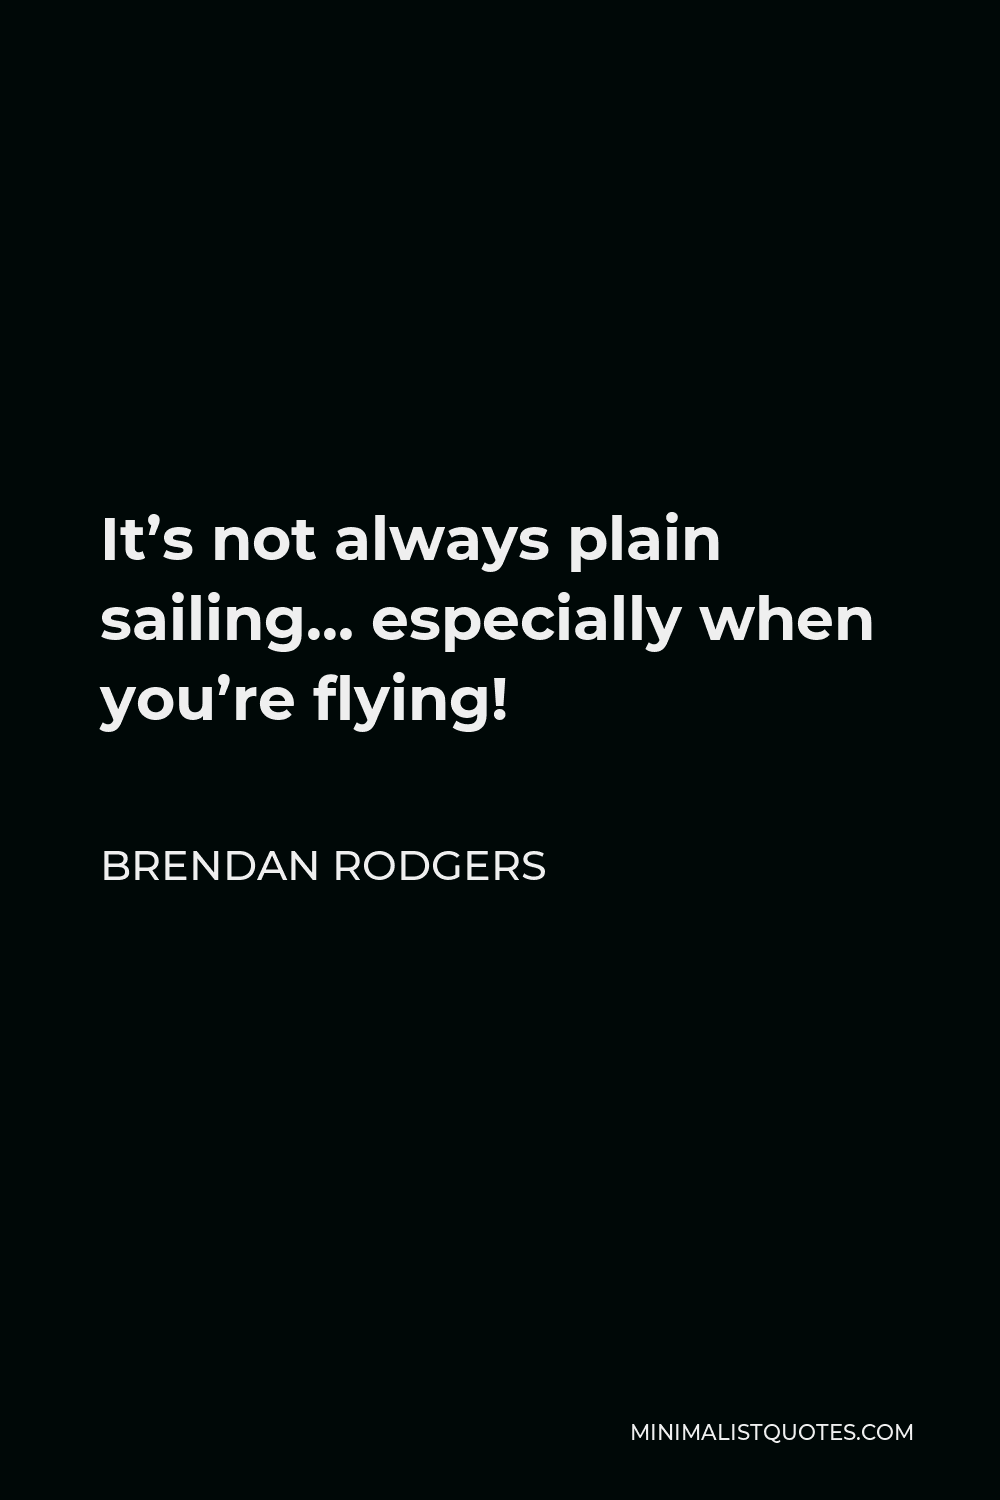 Brendan Rodgers Quote - It’s not always plain sailing… especially when you’re flying!